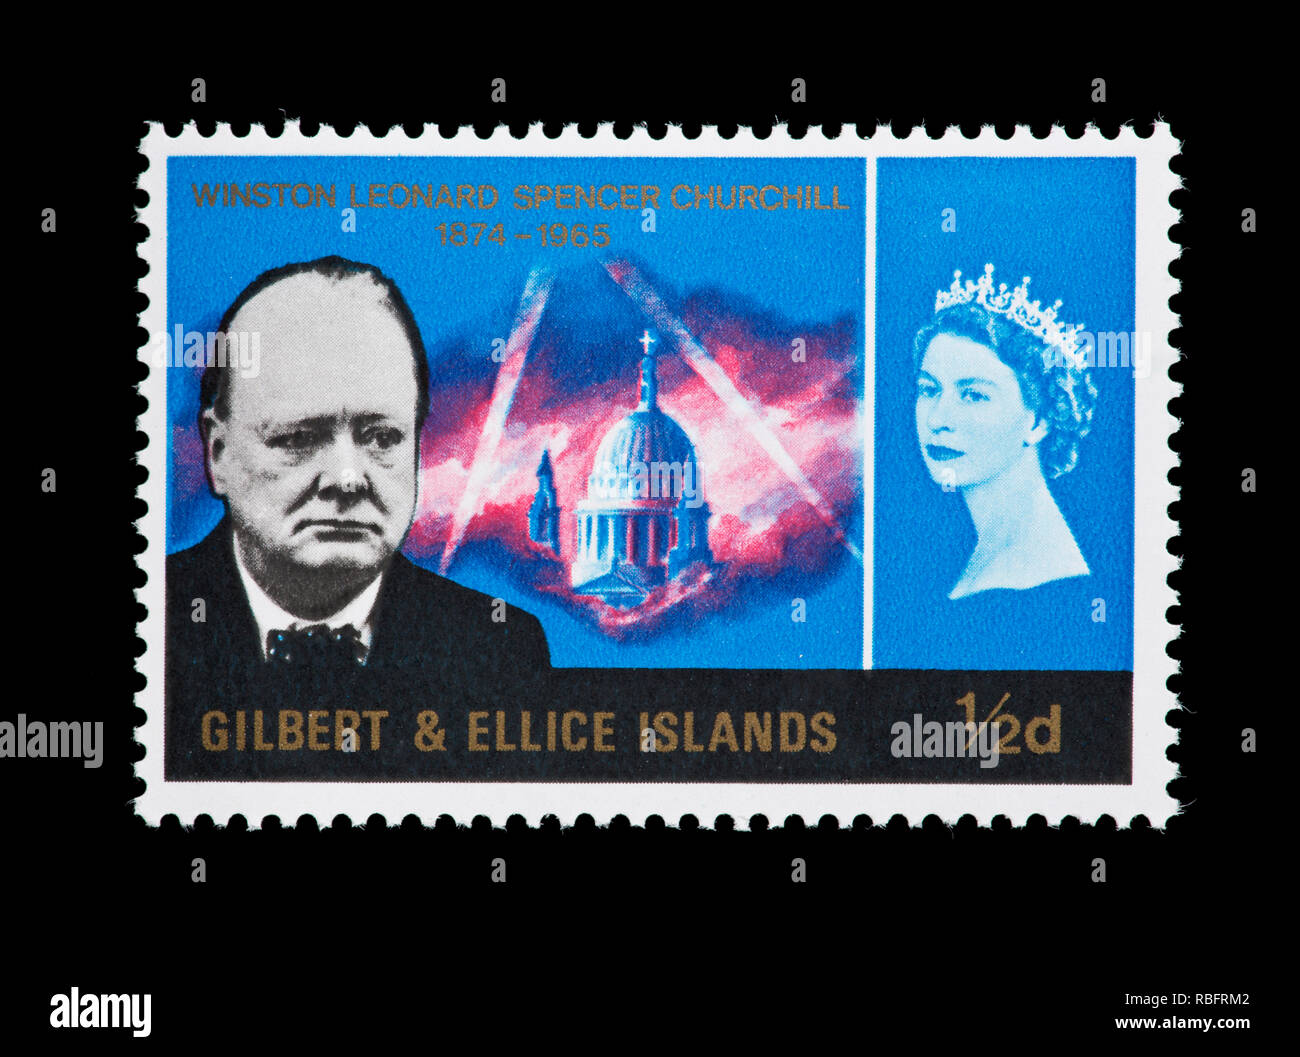 Postage stamp from the Gilbert and Ellice Islands depicting Sir Winston Churchill and London during the blitz, anniversary of death. Stock Photo